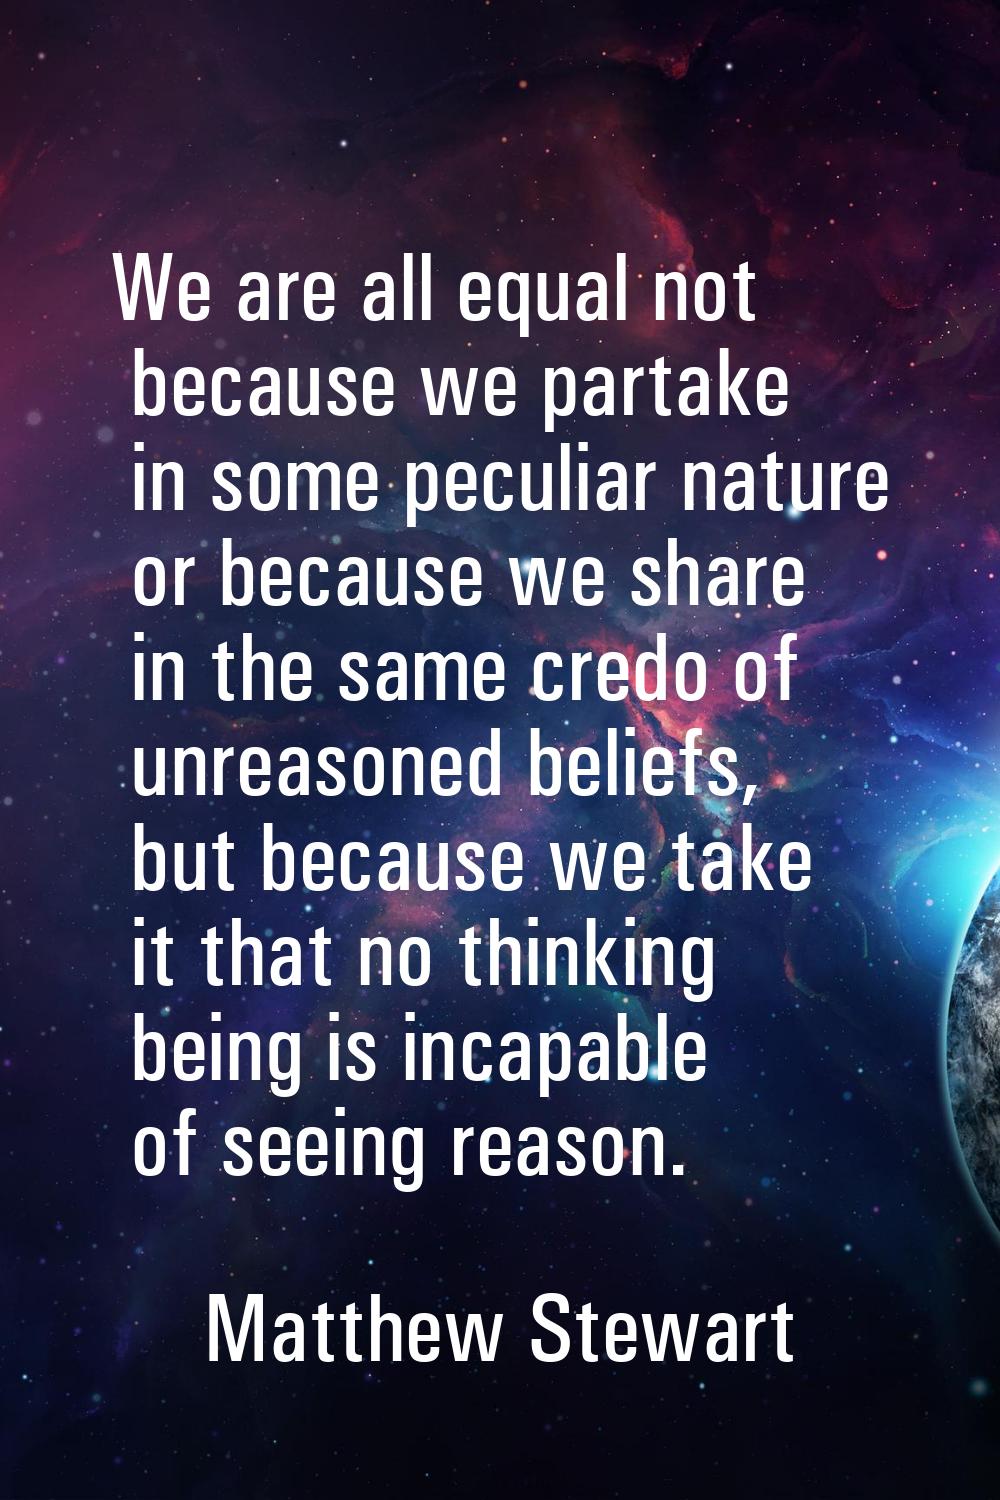 We are all equal not because we partake in some peculiar nature or because we share in the same cre